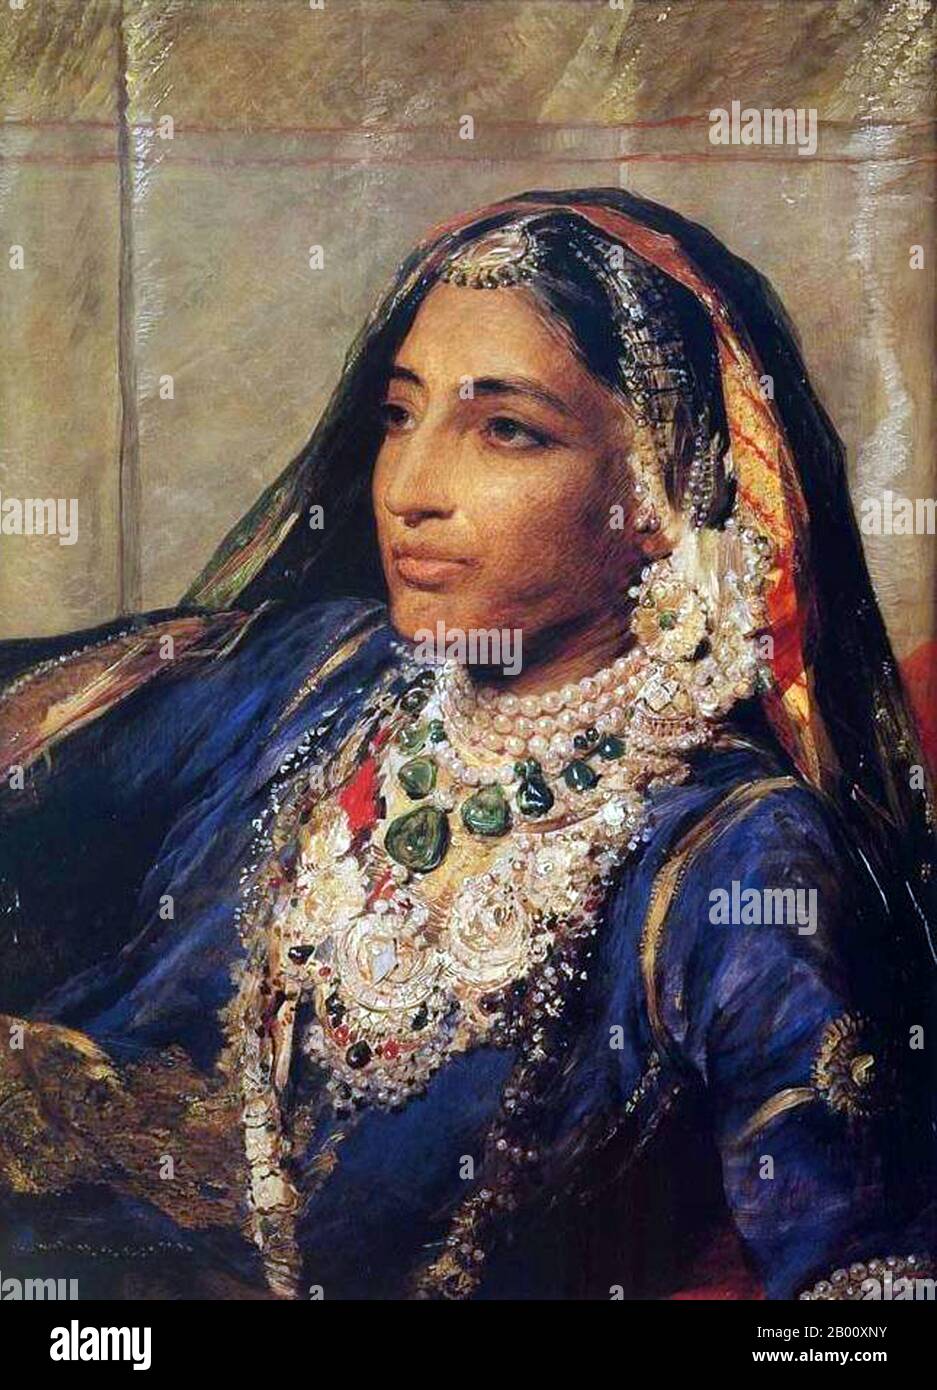 India: Portrait of Maharani Jind Kaur (1817-1863). Oil on canvas painting by George Richmond (1809-1896), 1863.  Maharani Jind Kaur (1817-1863), also popularly known as Rani Jindan. She was the youngest wife of Maharajah Ranjit Singh and the mother of the last Sikh Emperor, Maharajah Duleep Singh. In 1845 she became Regent of Punjab for Duleep Singh, the Queen Mother (or Mai) of the last Sikh sovereign of the Punjab. She was renowned for her great beauty and personal charm along with her strength of will and opposition to British imperialism in India. Stock Photo